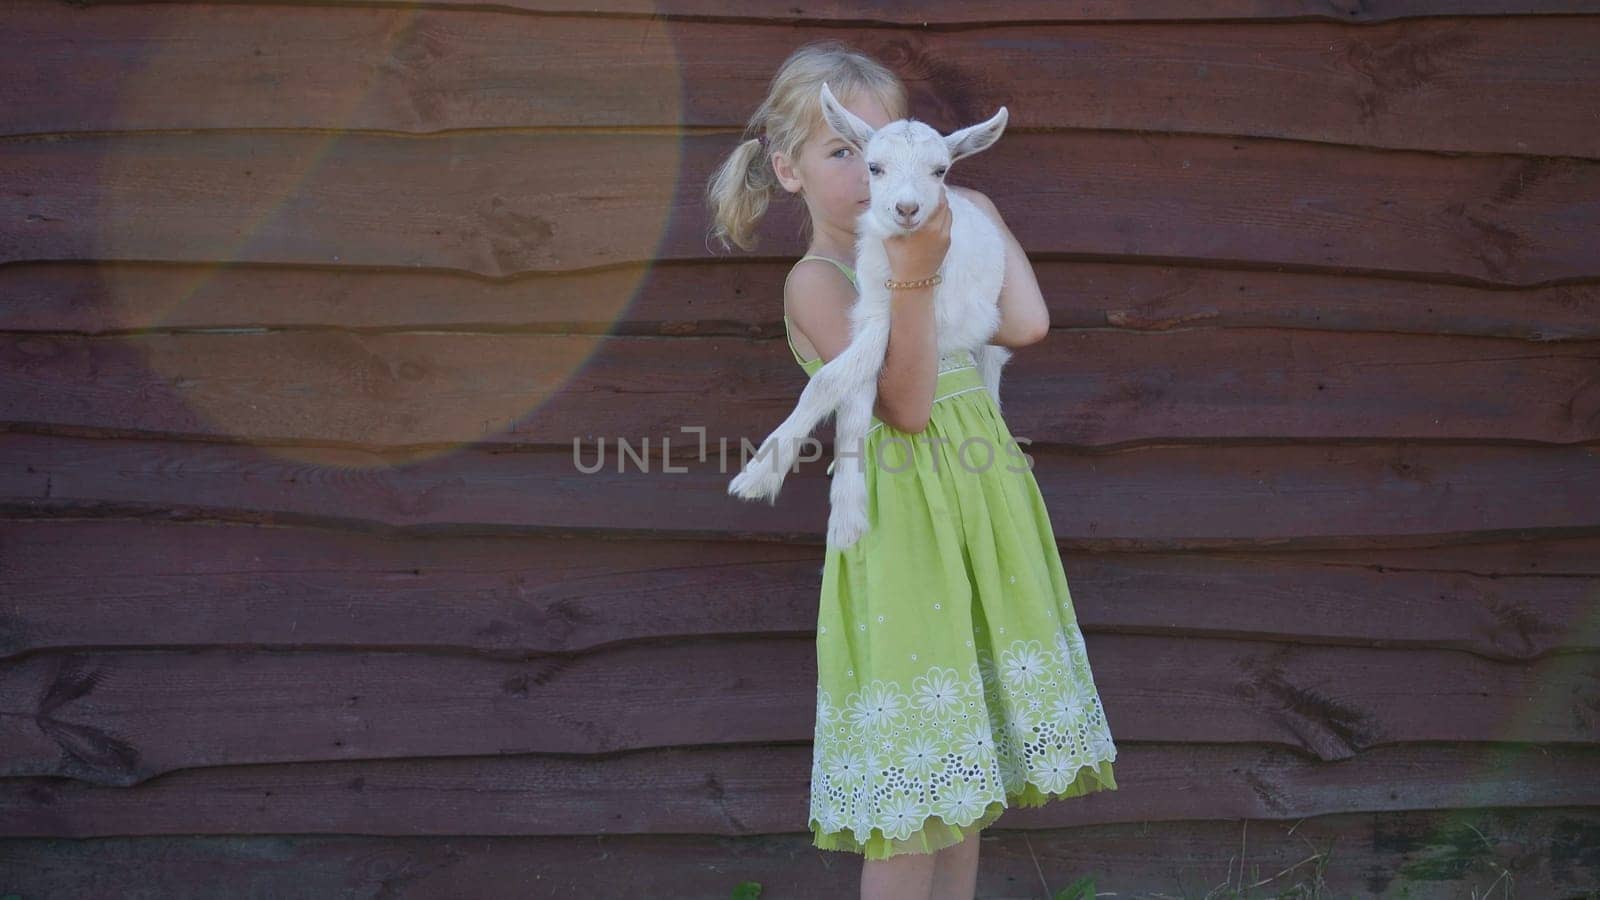 6 year old girl holding a small goat in her arms